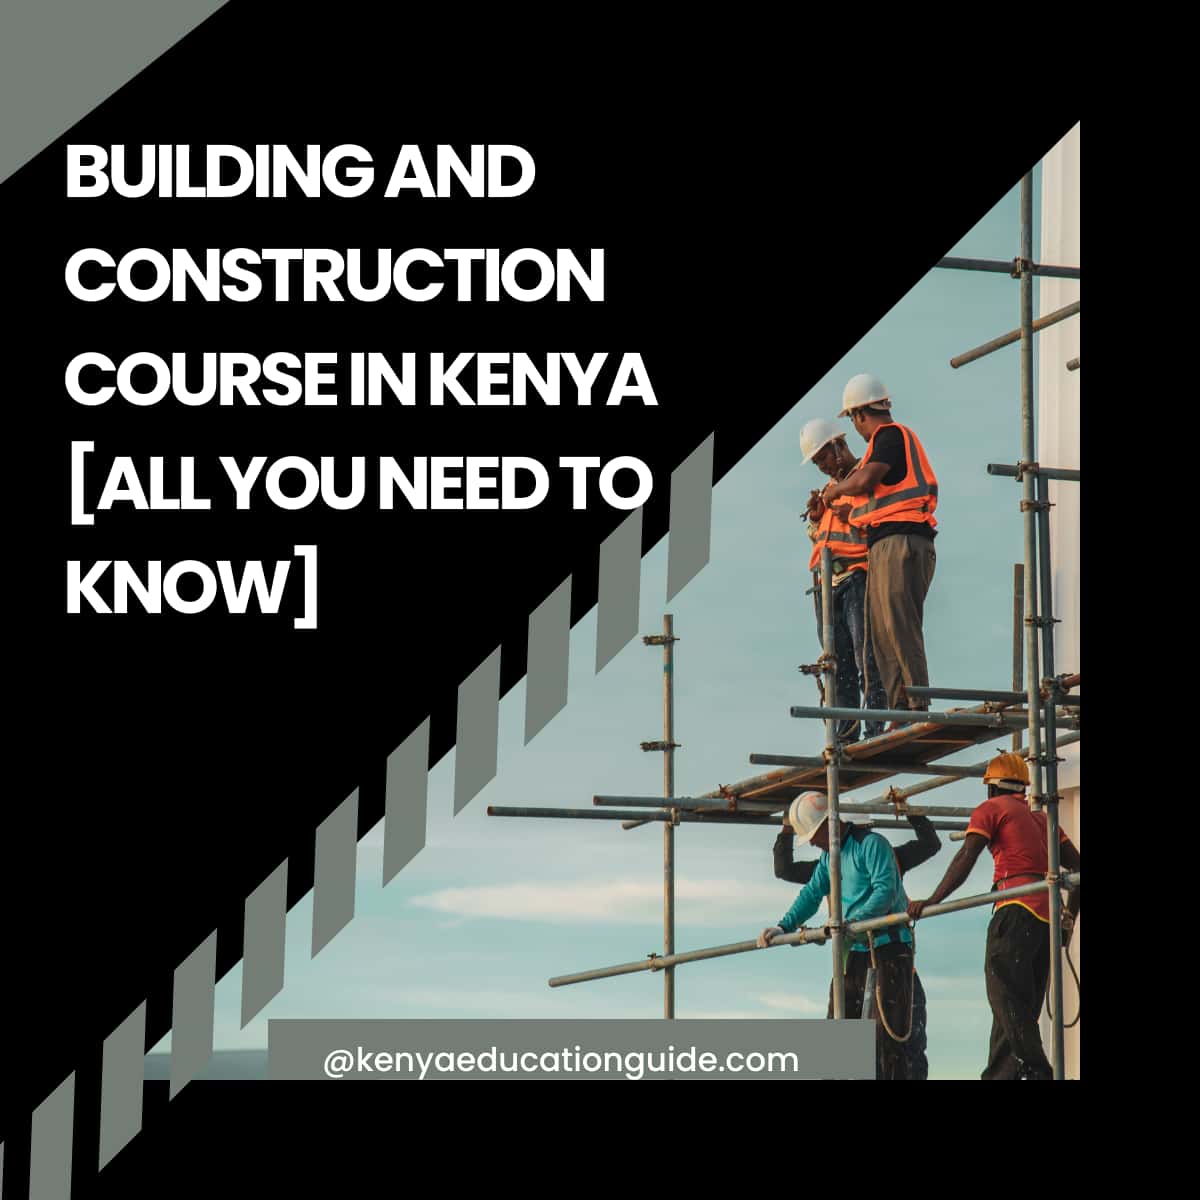 Building and Construction Course in Kenya